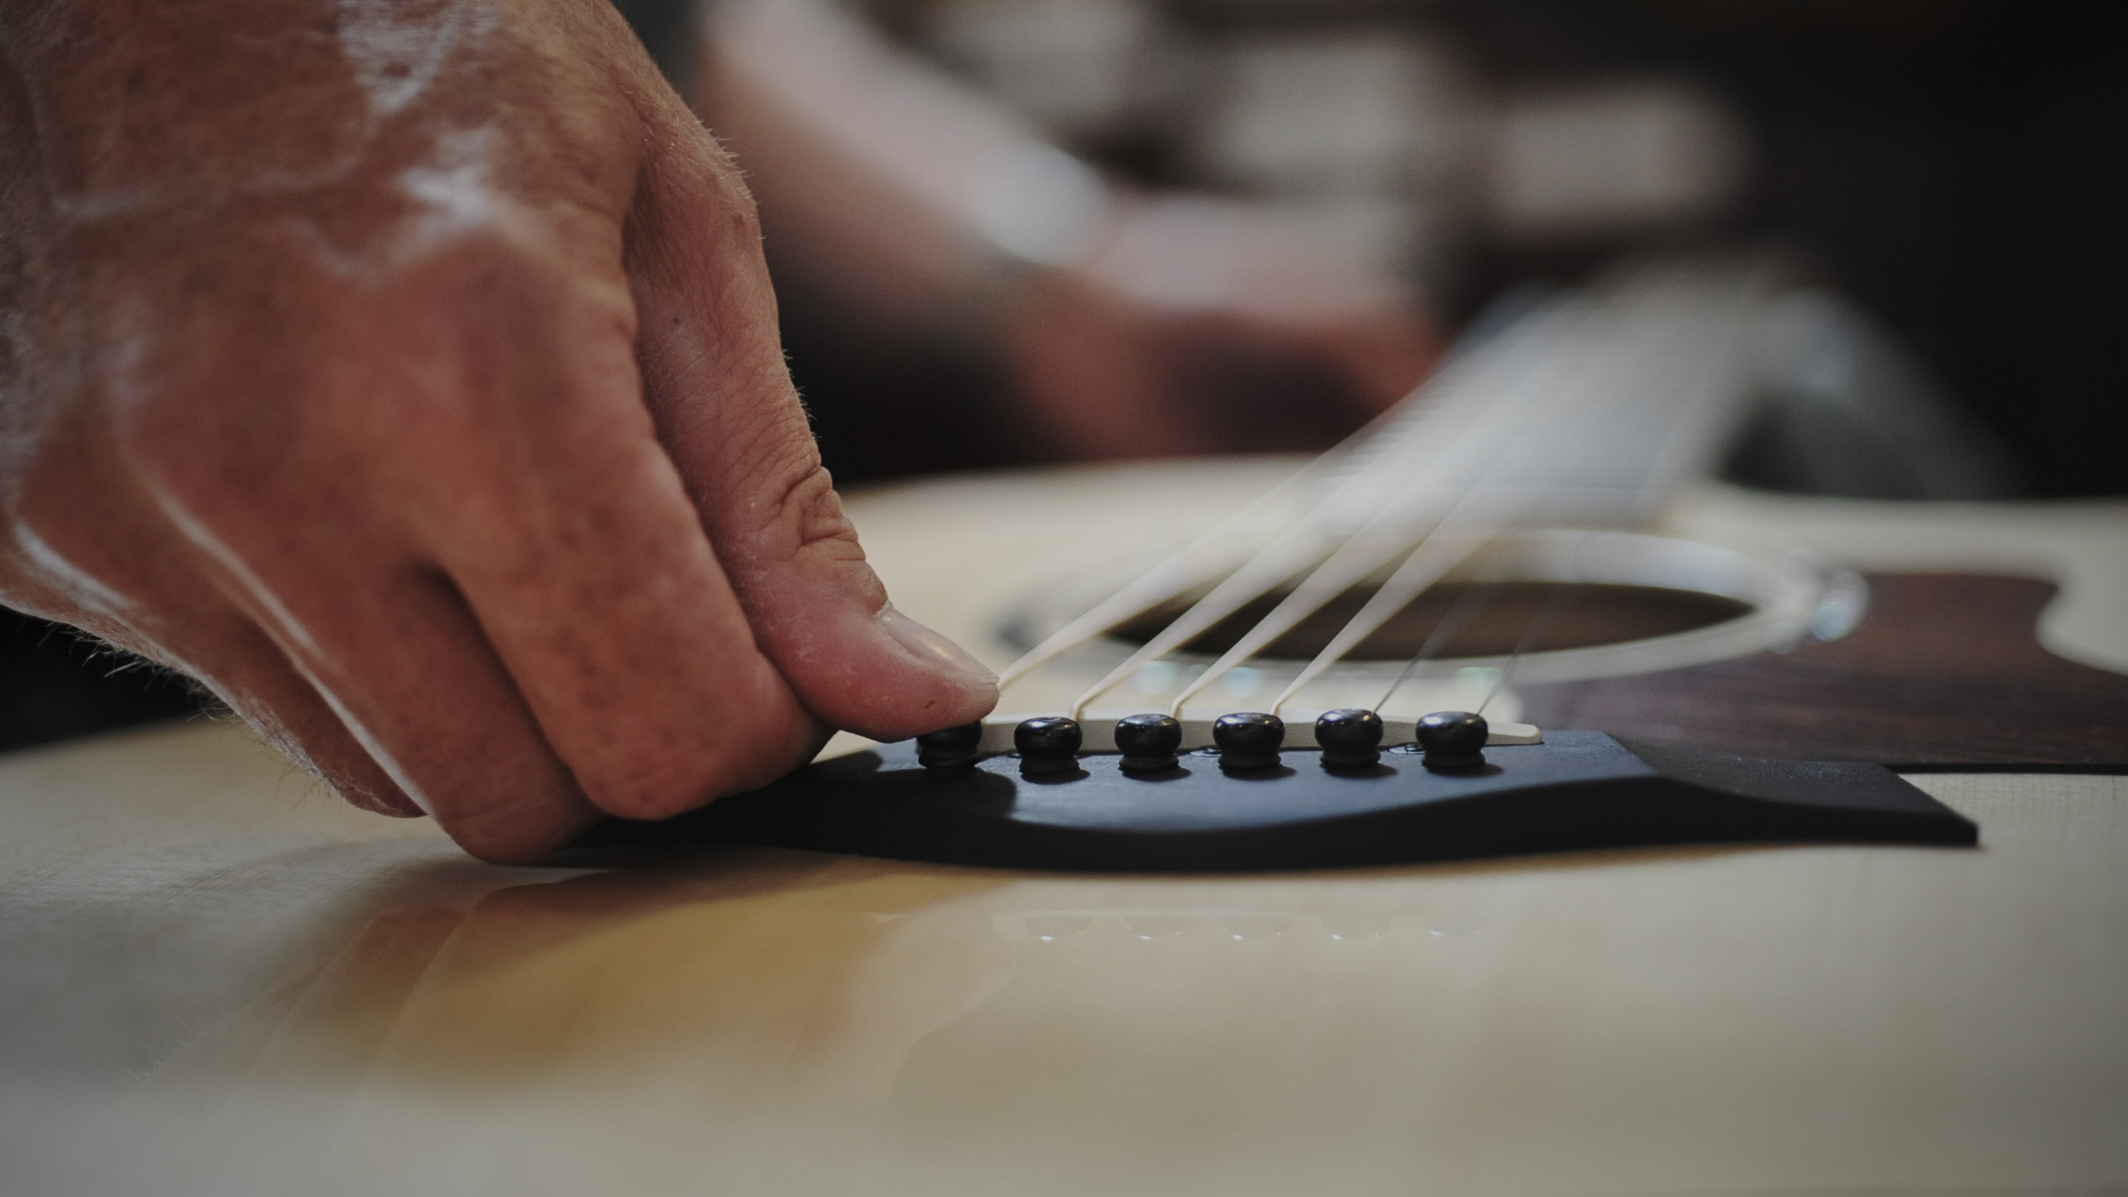 How To Change Acoustic Guitar Strings for Beginners. The BEST Way